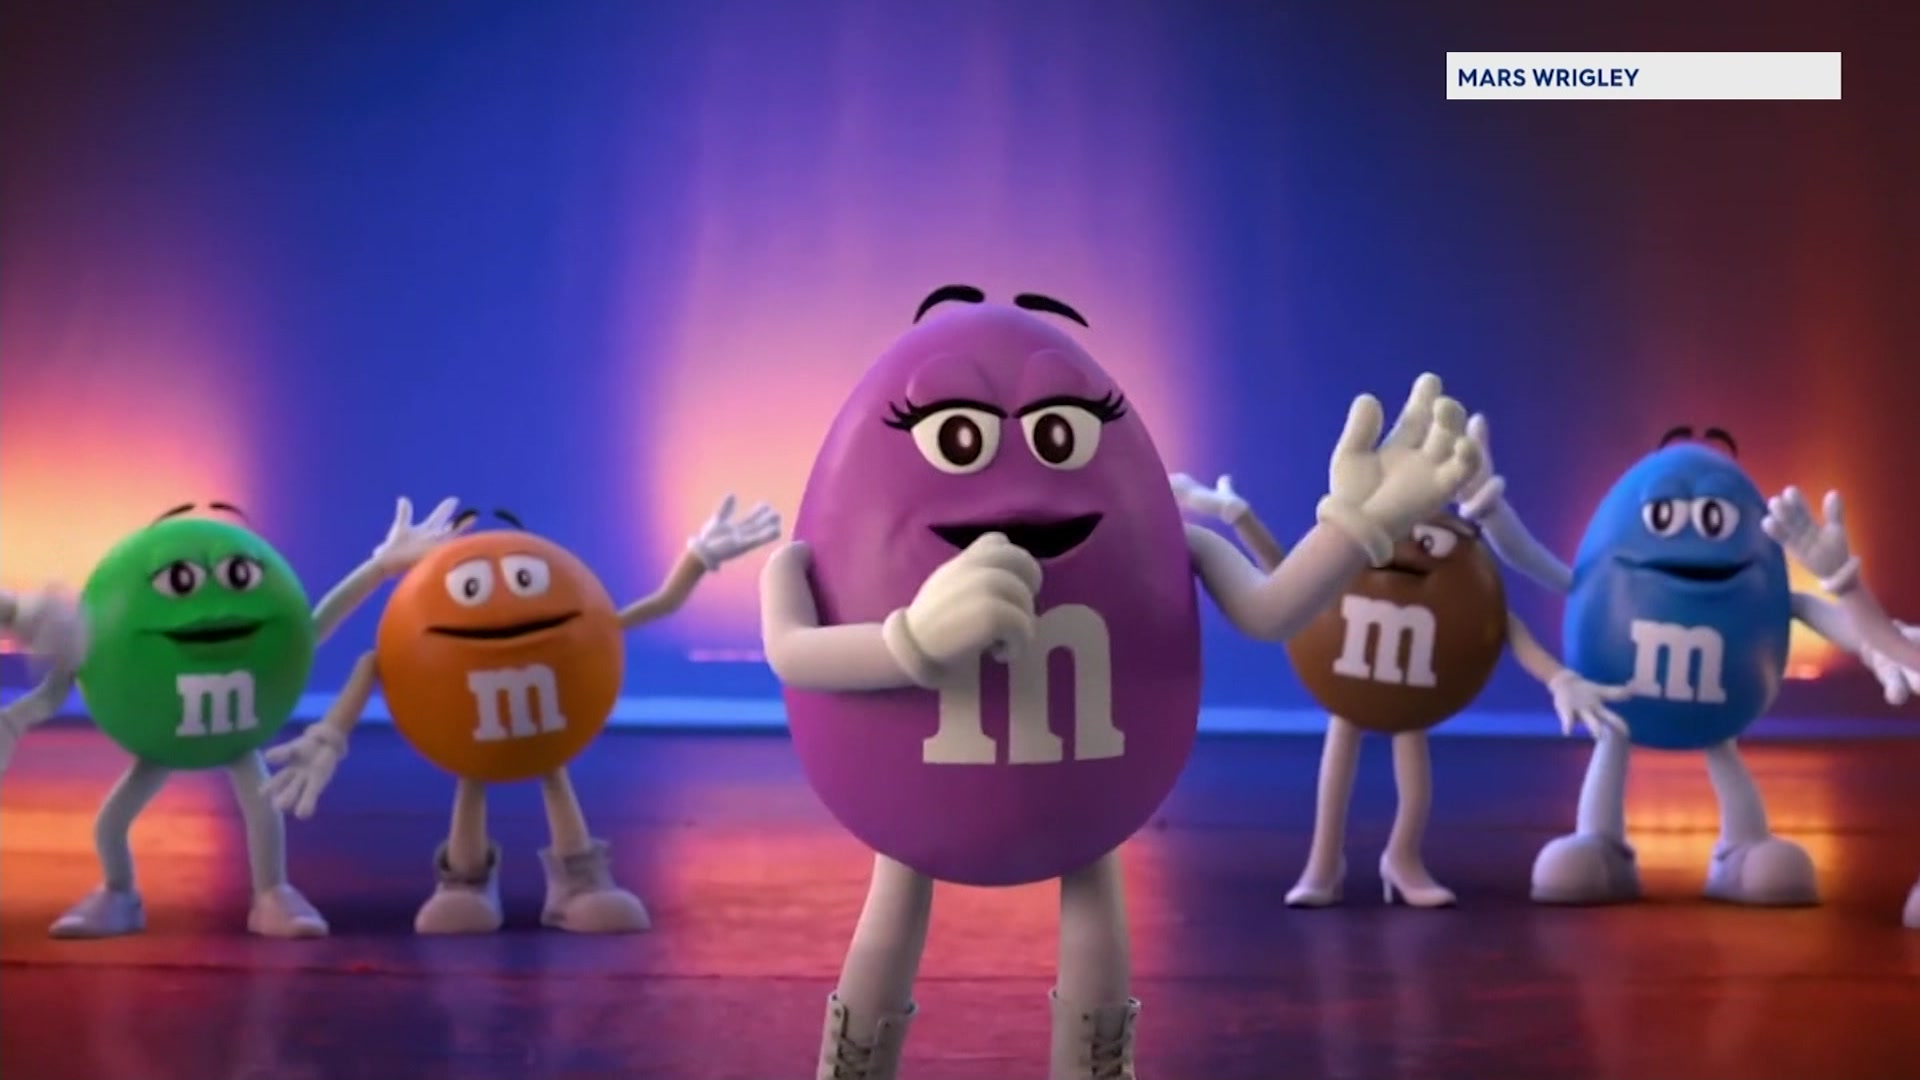 M&Ms introduce Purple, a new character designed to represent